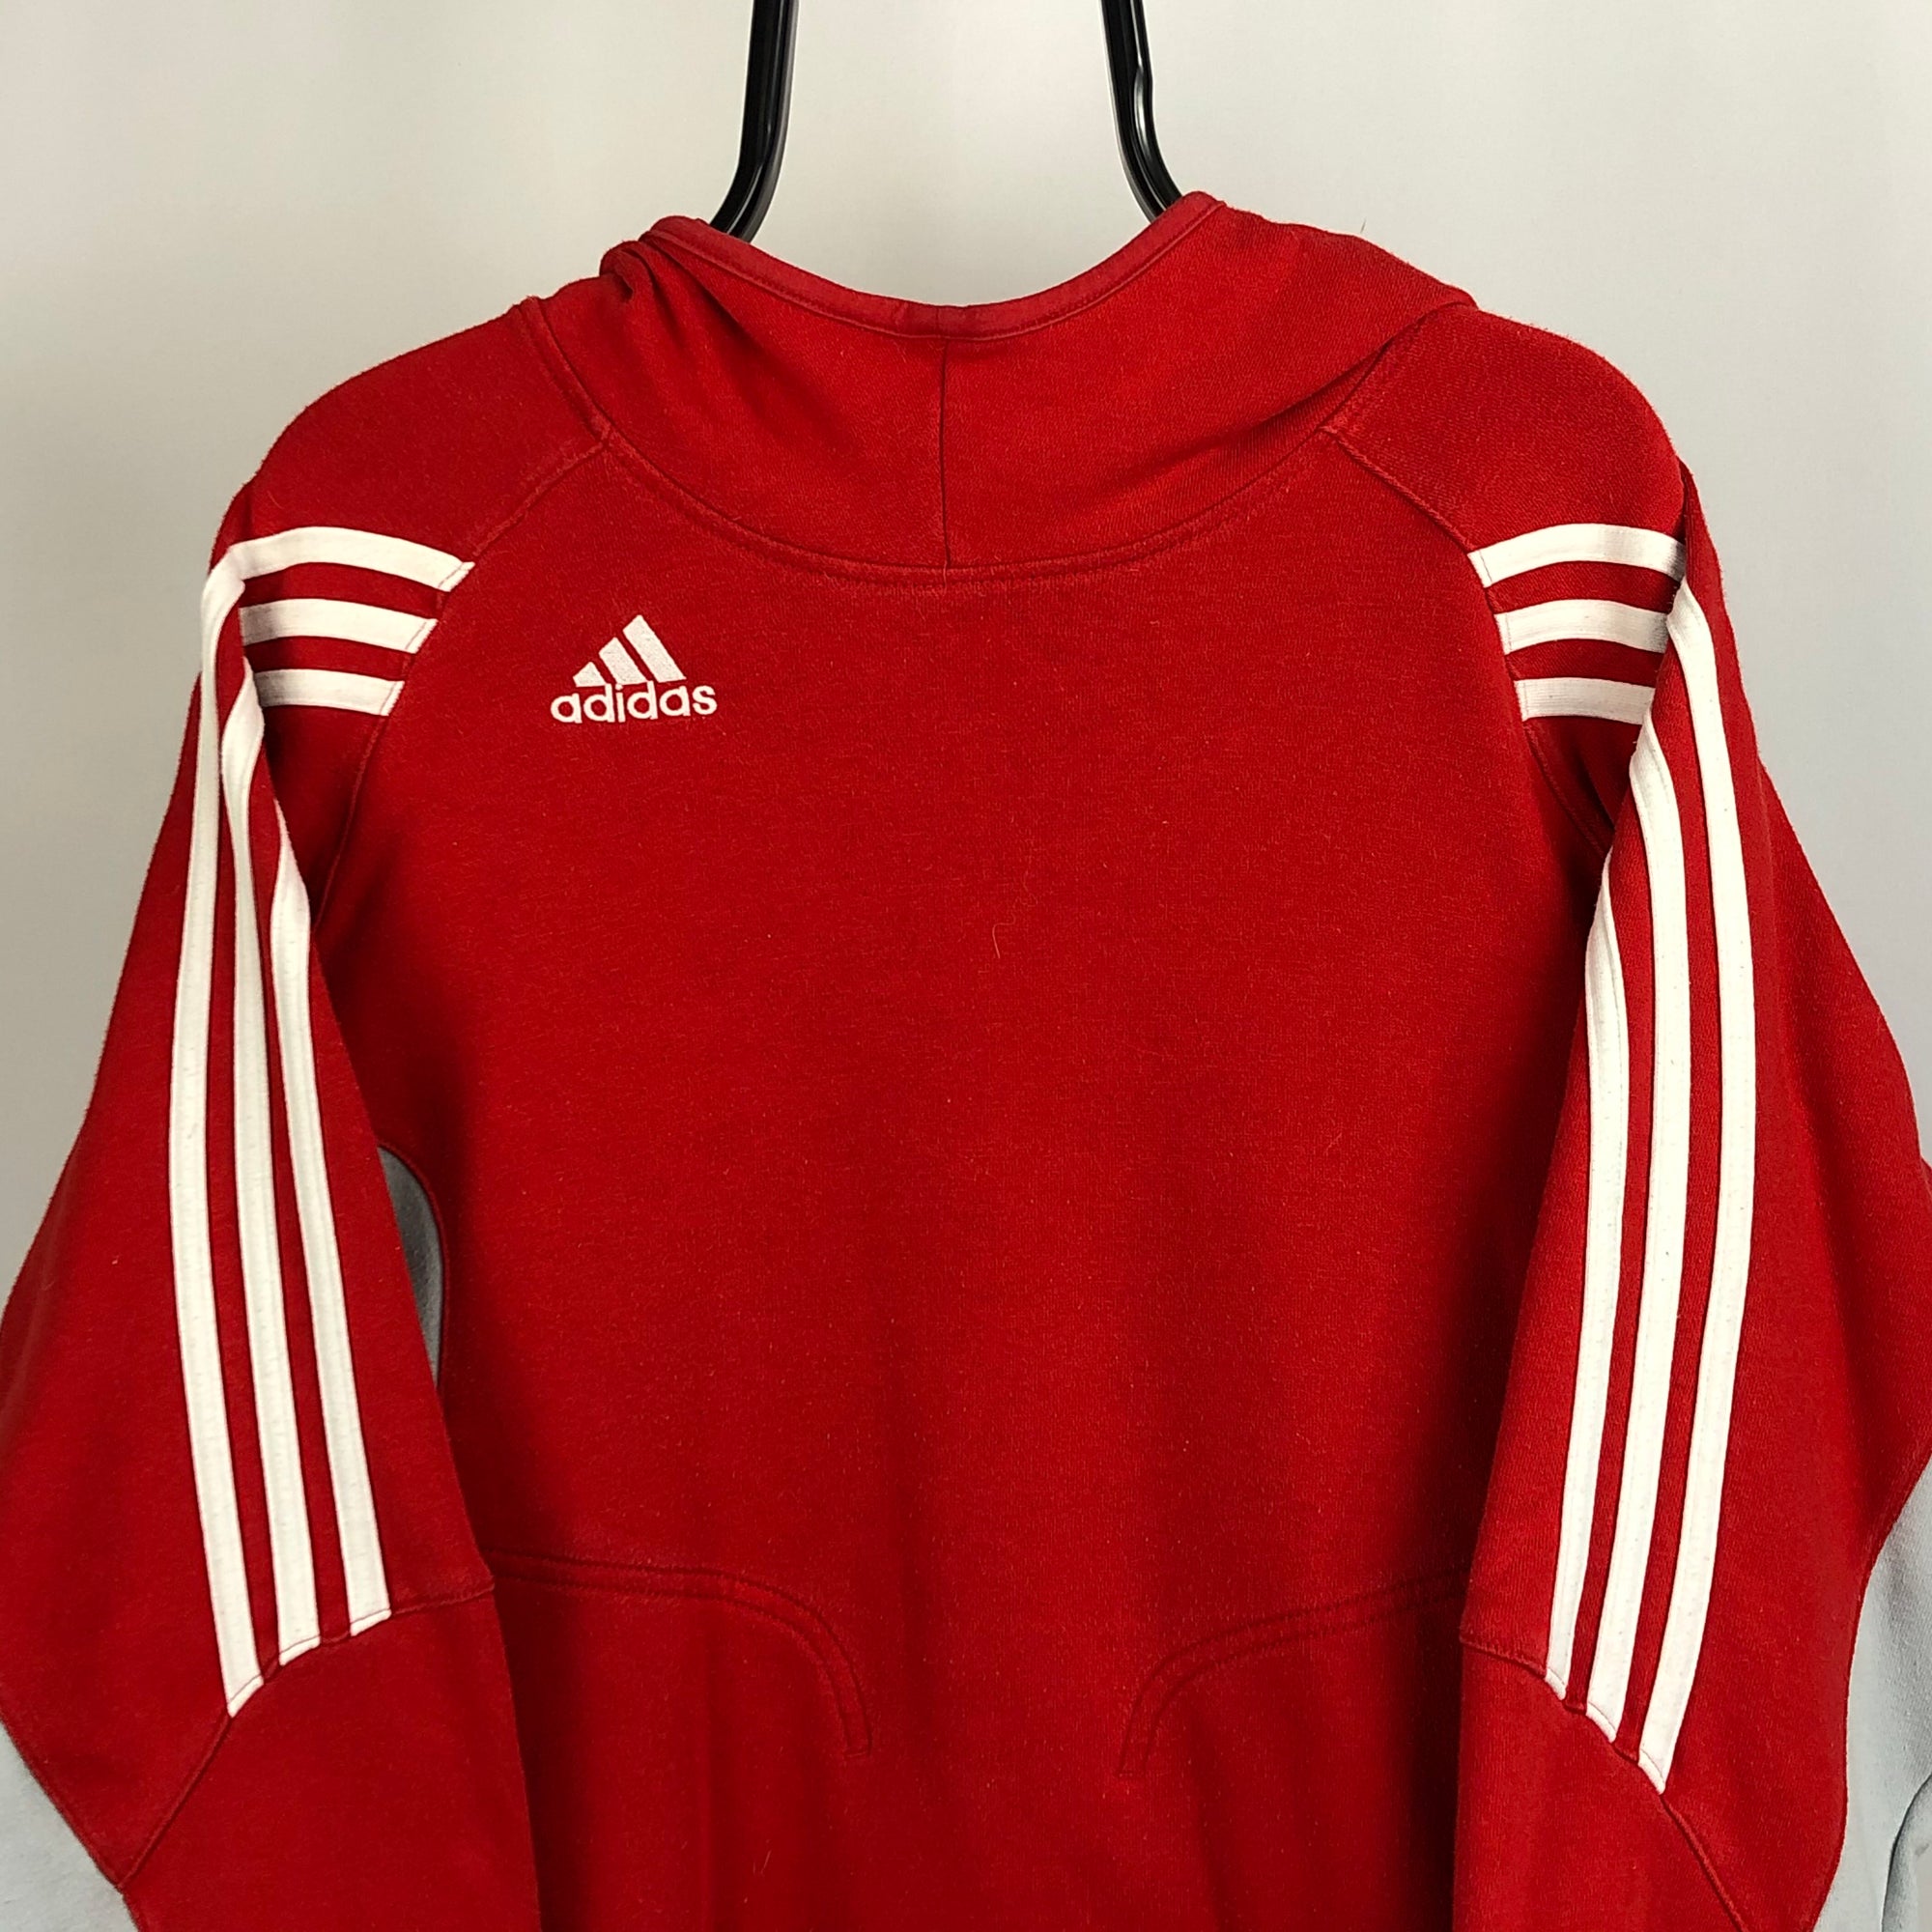 Adidas Embroidered Small Logo Hoodie in Red/Stone - Men's Medium/Women's Large